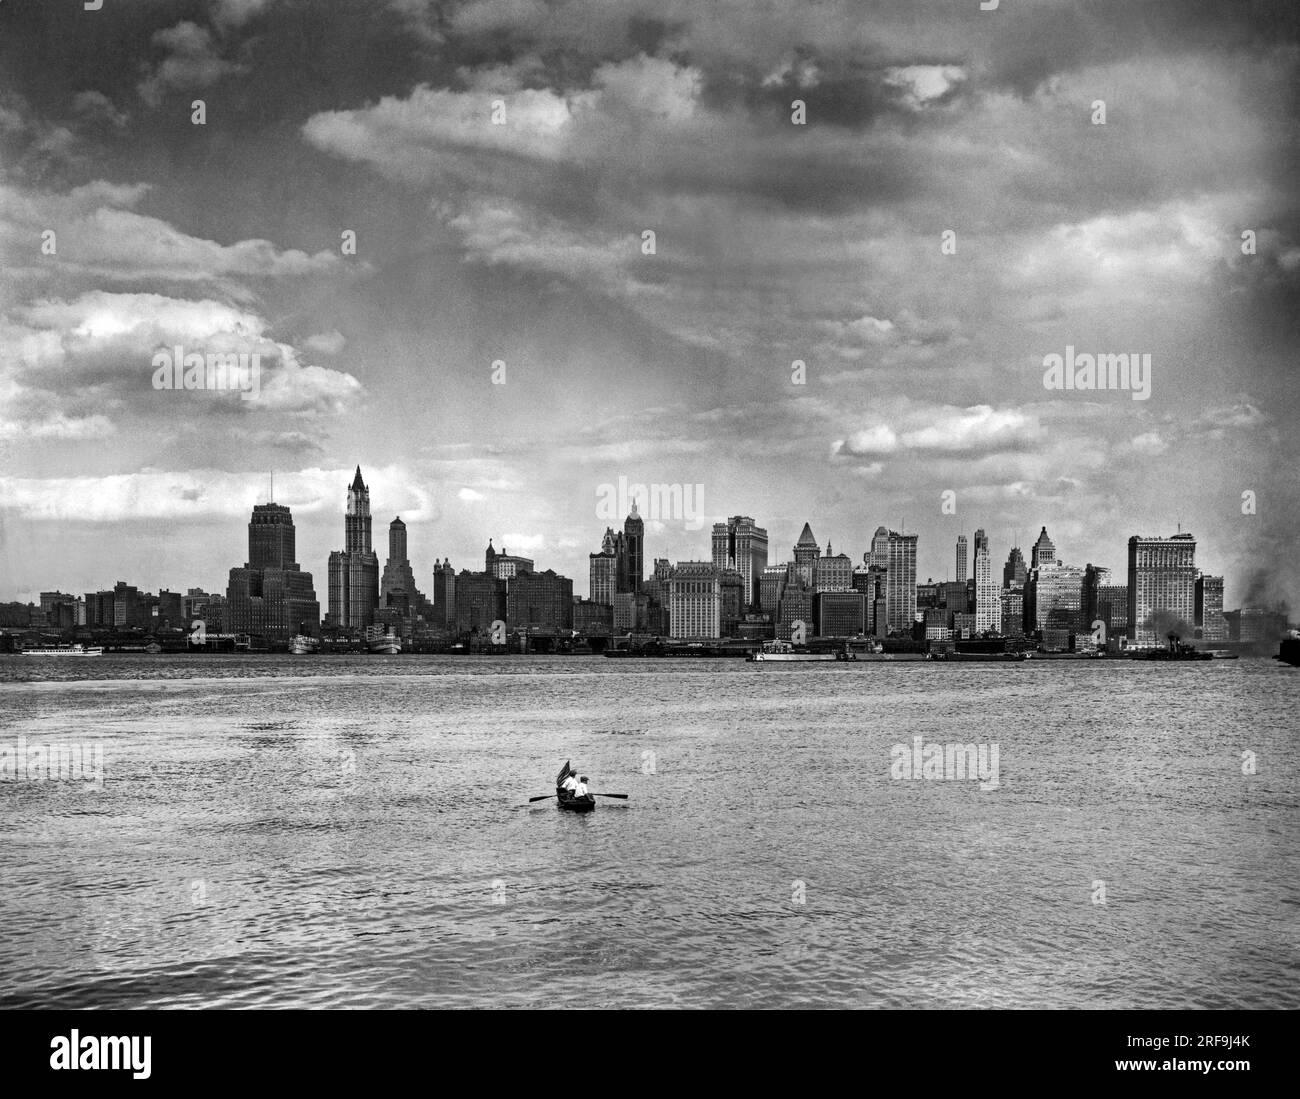 New York, New York:  c. 1927. Two men in a rowboat with an American flag for a bowsprit head off from New Jersey across the Hudson River towards Lower Manhattan. The Woolworth Building is the tallest at left, then next tallest to the right with the round dome is the Singer Building, and the double Equitable Building is to the south of that. Stock Photo